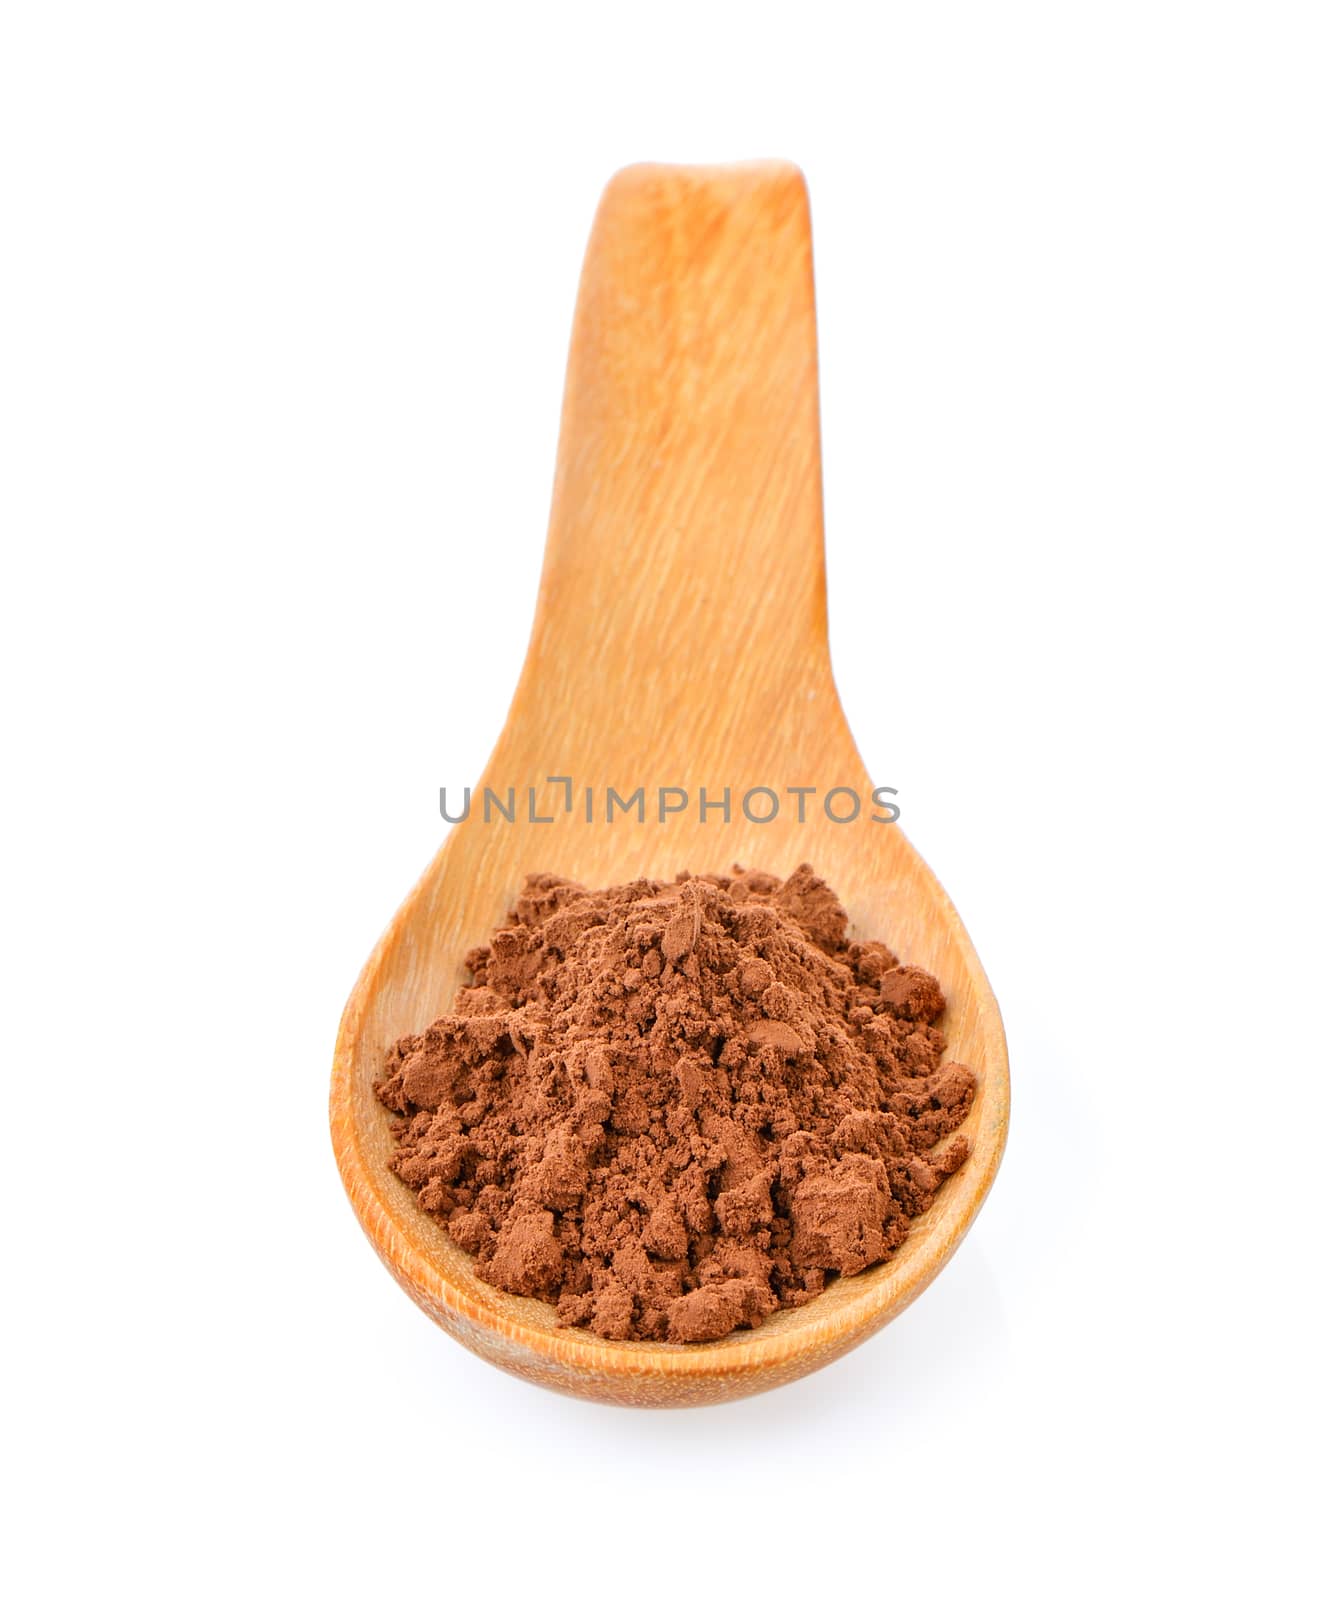 Cocoa powder in a wood spoon on white background